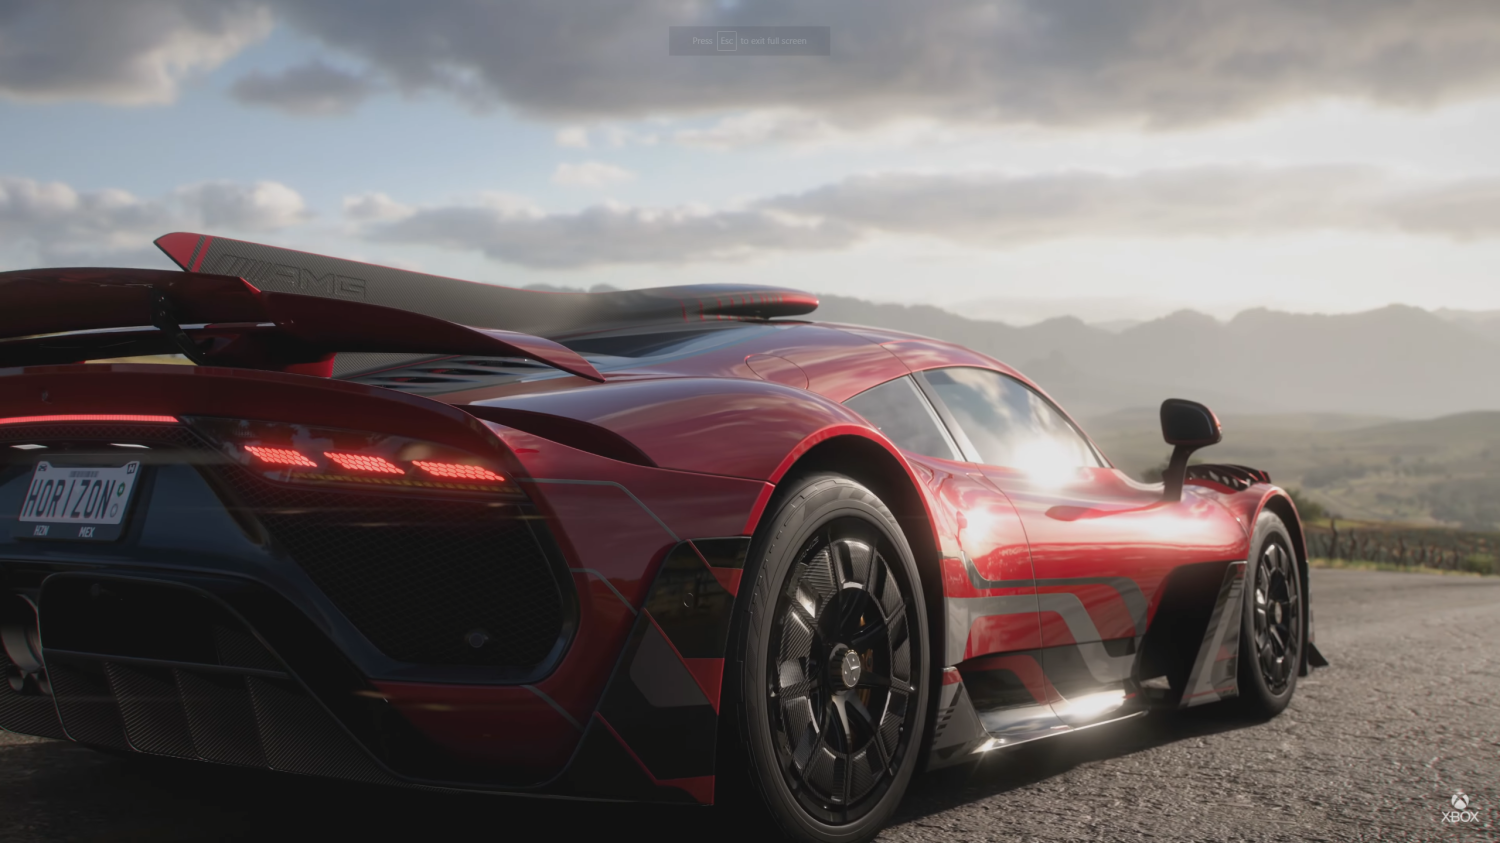 Forza Horizon 5 PC Requirements Detailed: Can Your PC Run it?